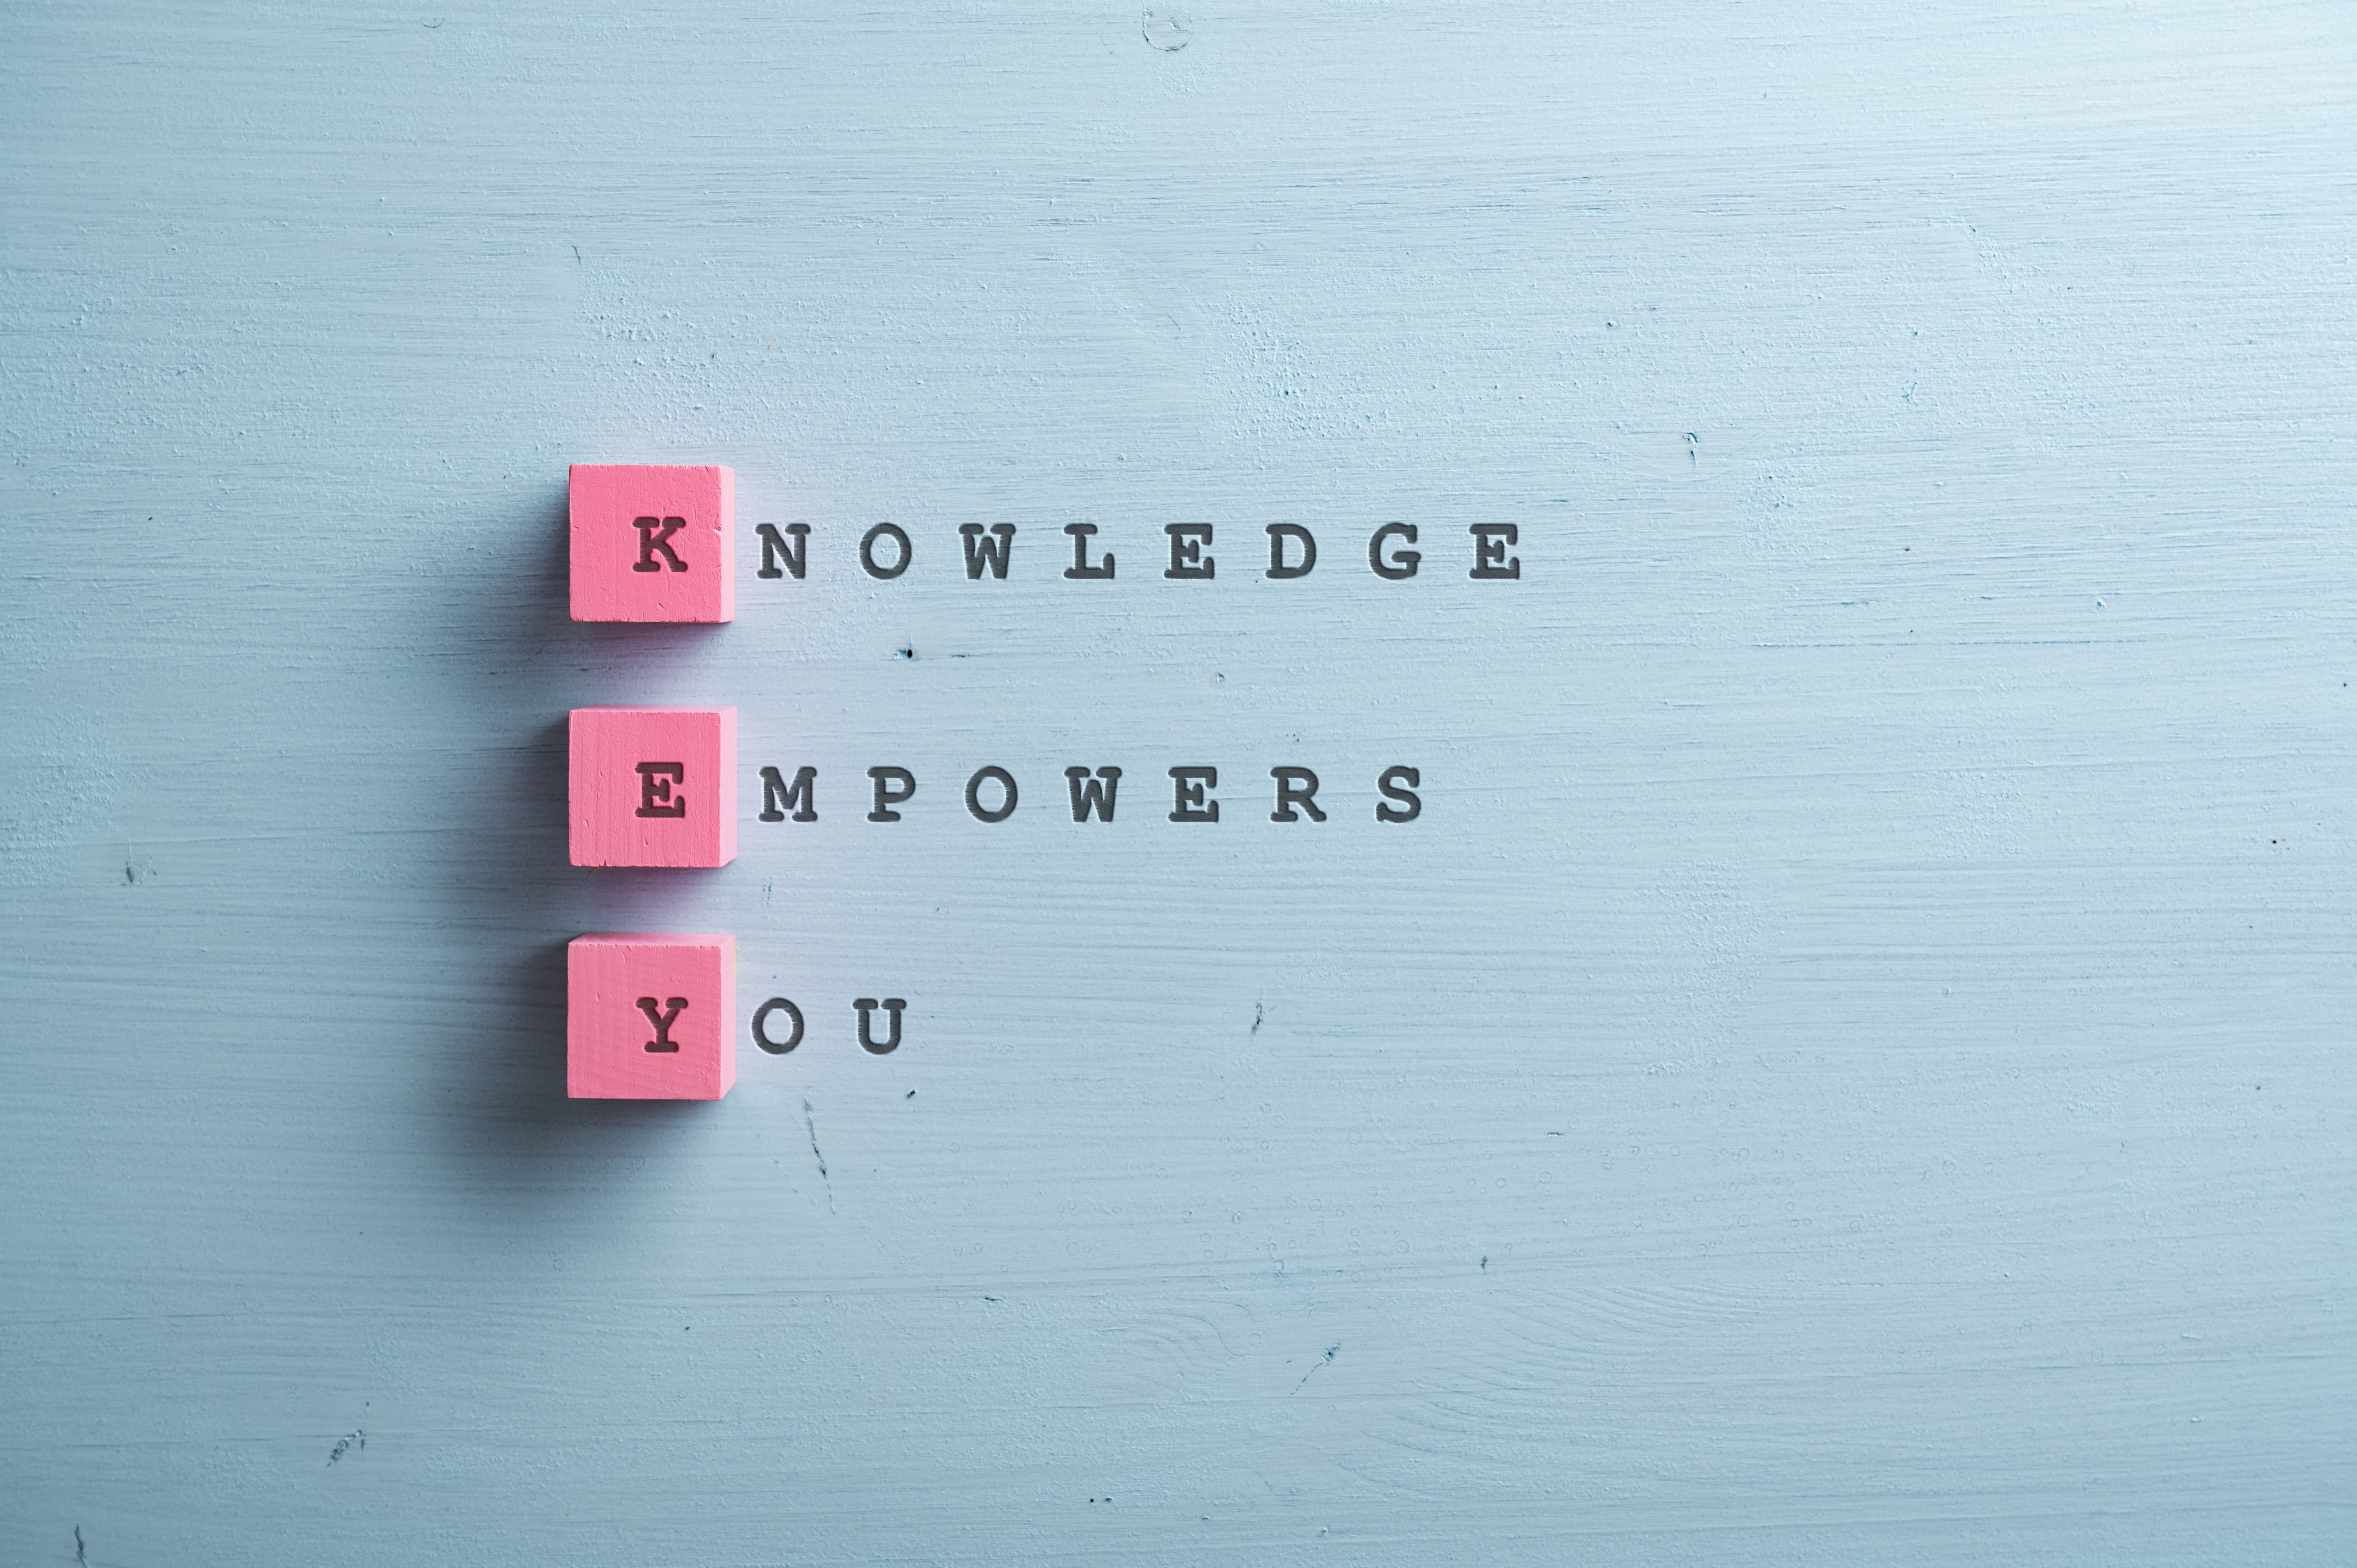 Knowledge empowers you sign